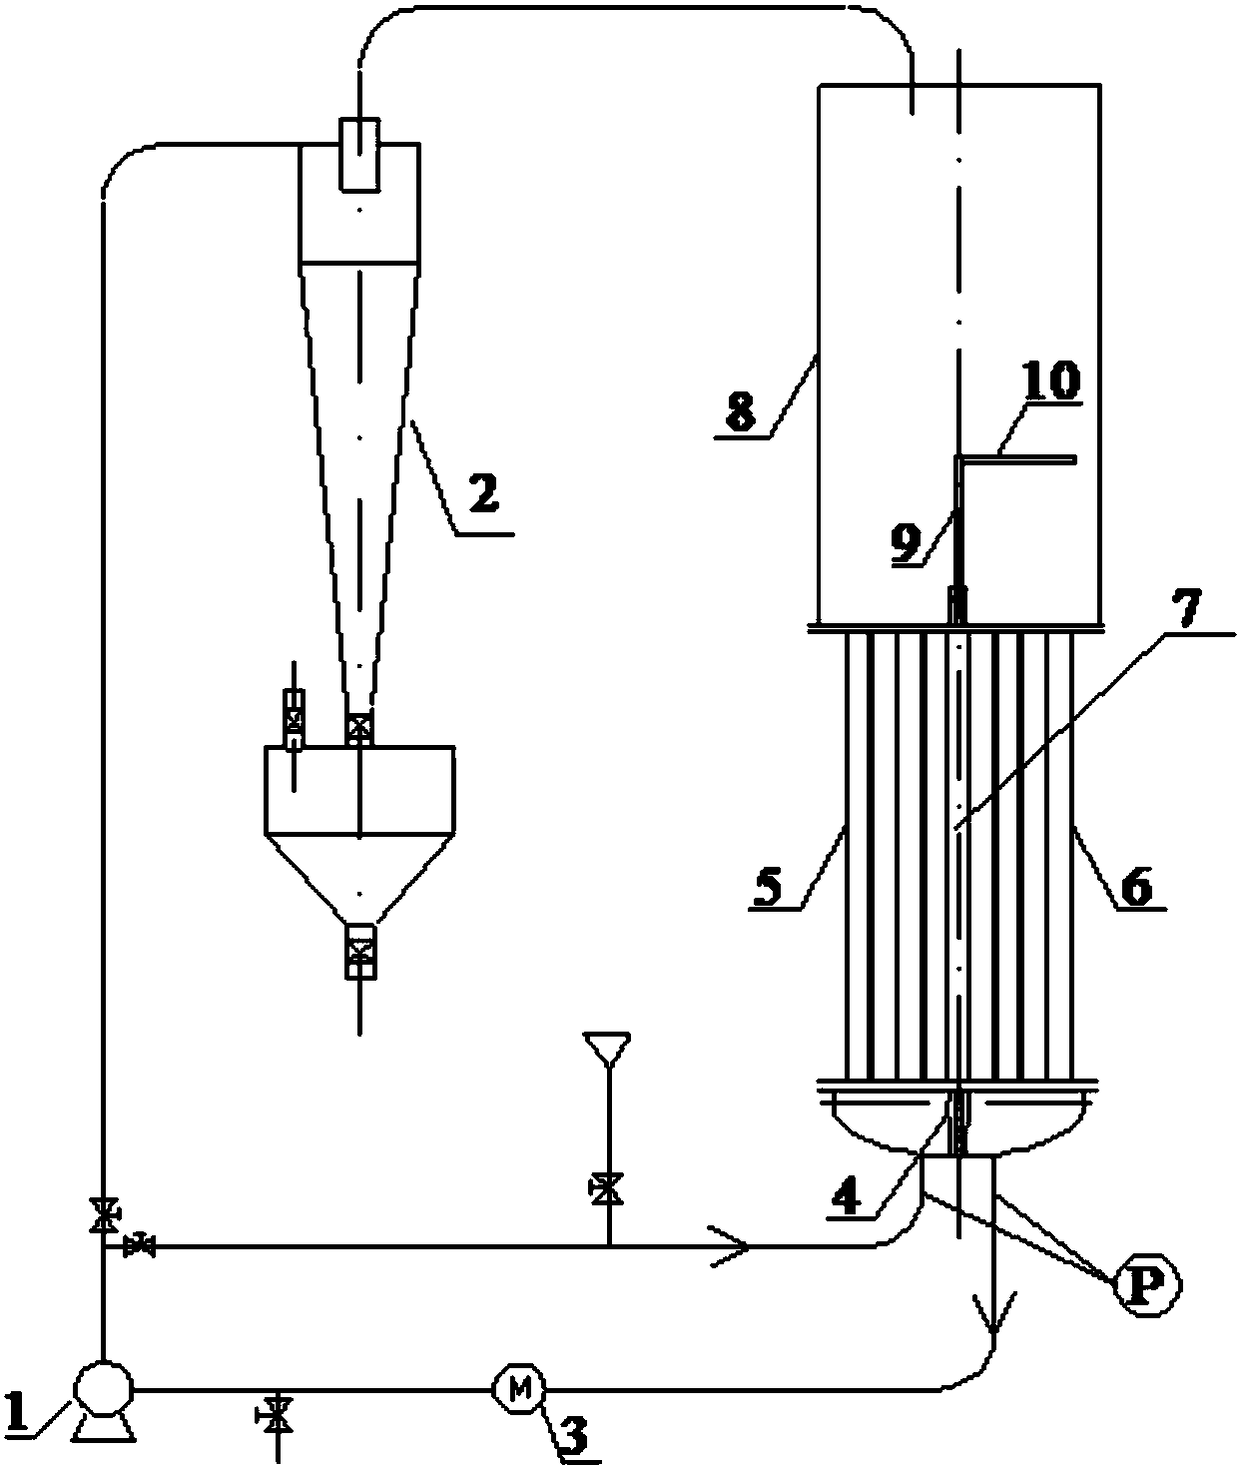 Vertical double-tube-pass circulation fluidized bed evaporator with separation plate